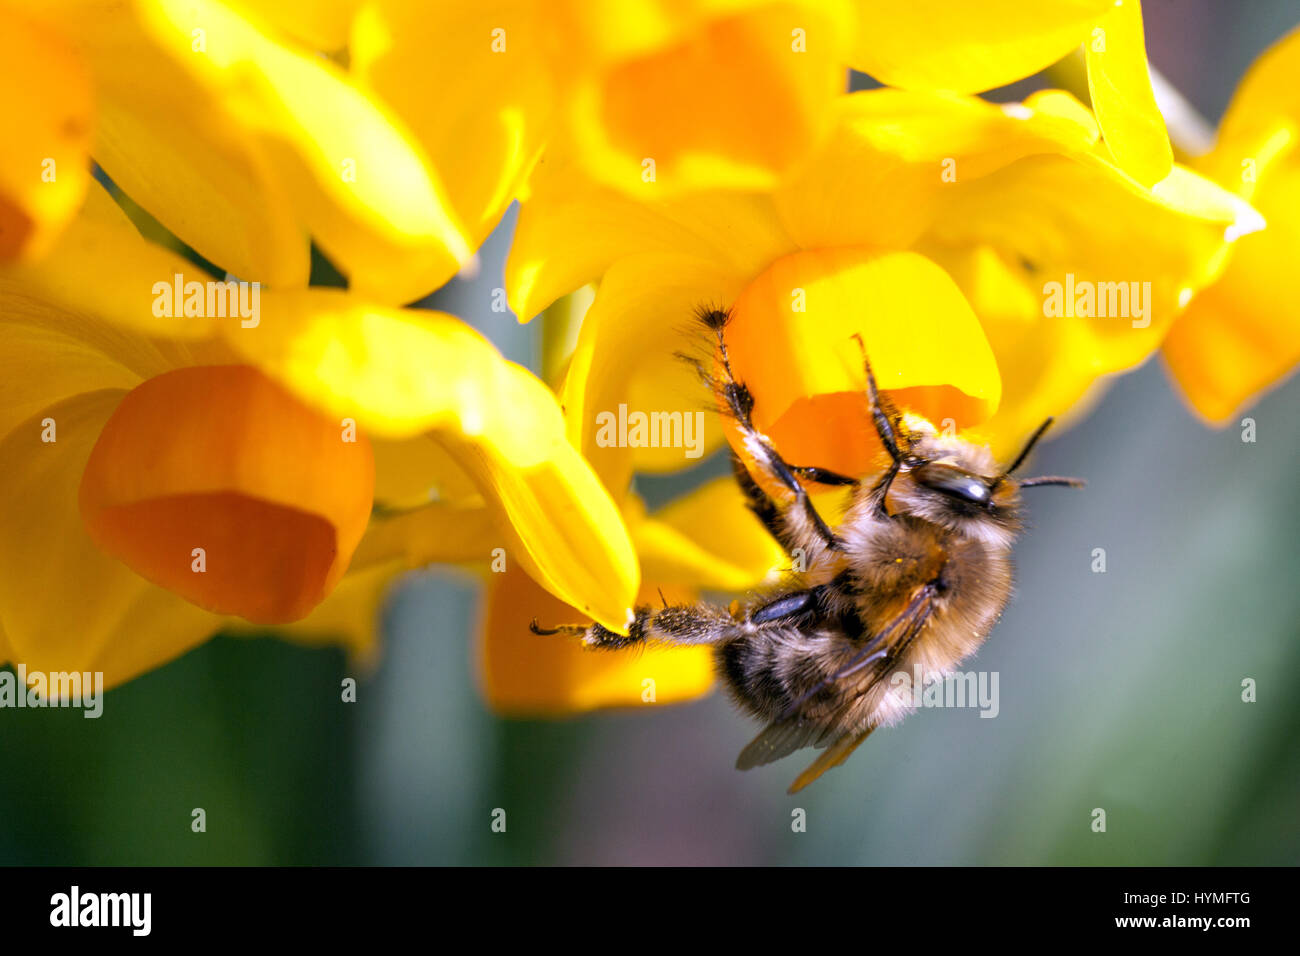 Narcissus 'Martinette', bee on flower, Daffodil, Daffodils Stock Photo